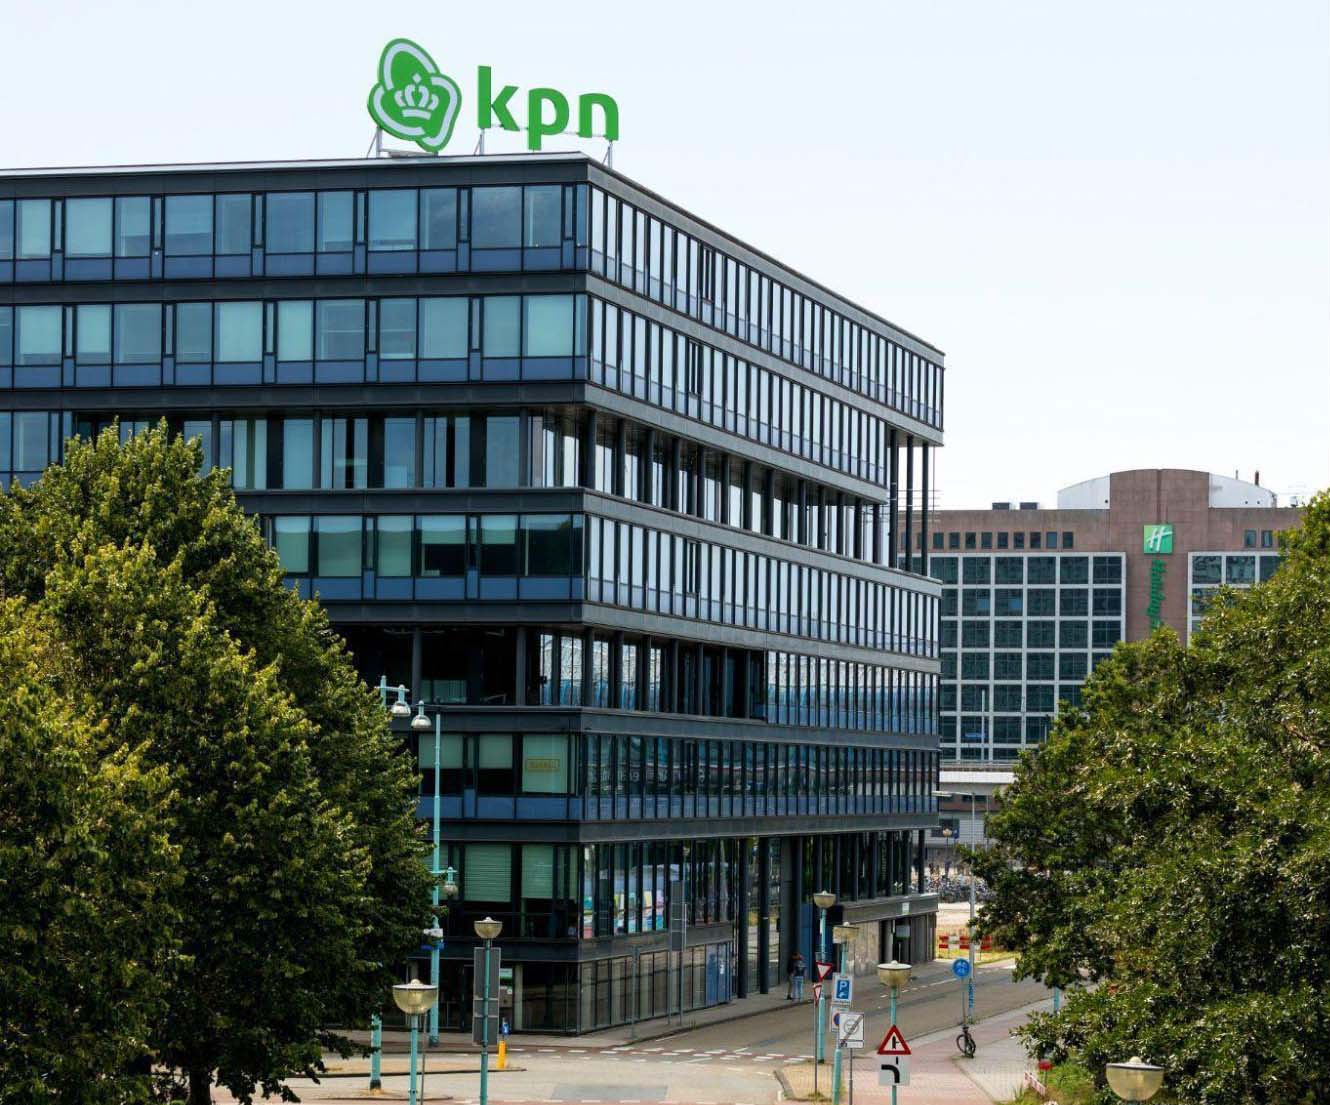 KPN is a leading telecommunications and IT provider and market leader in the Netherlands, and employs more than 10,000 people. 